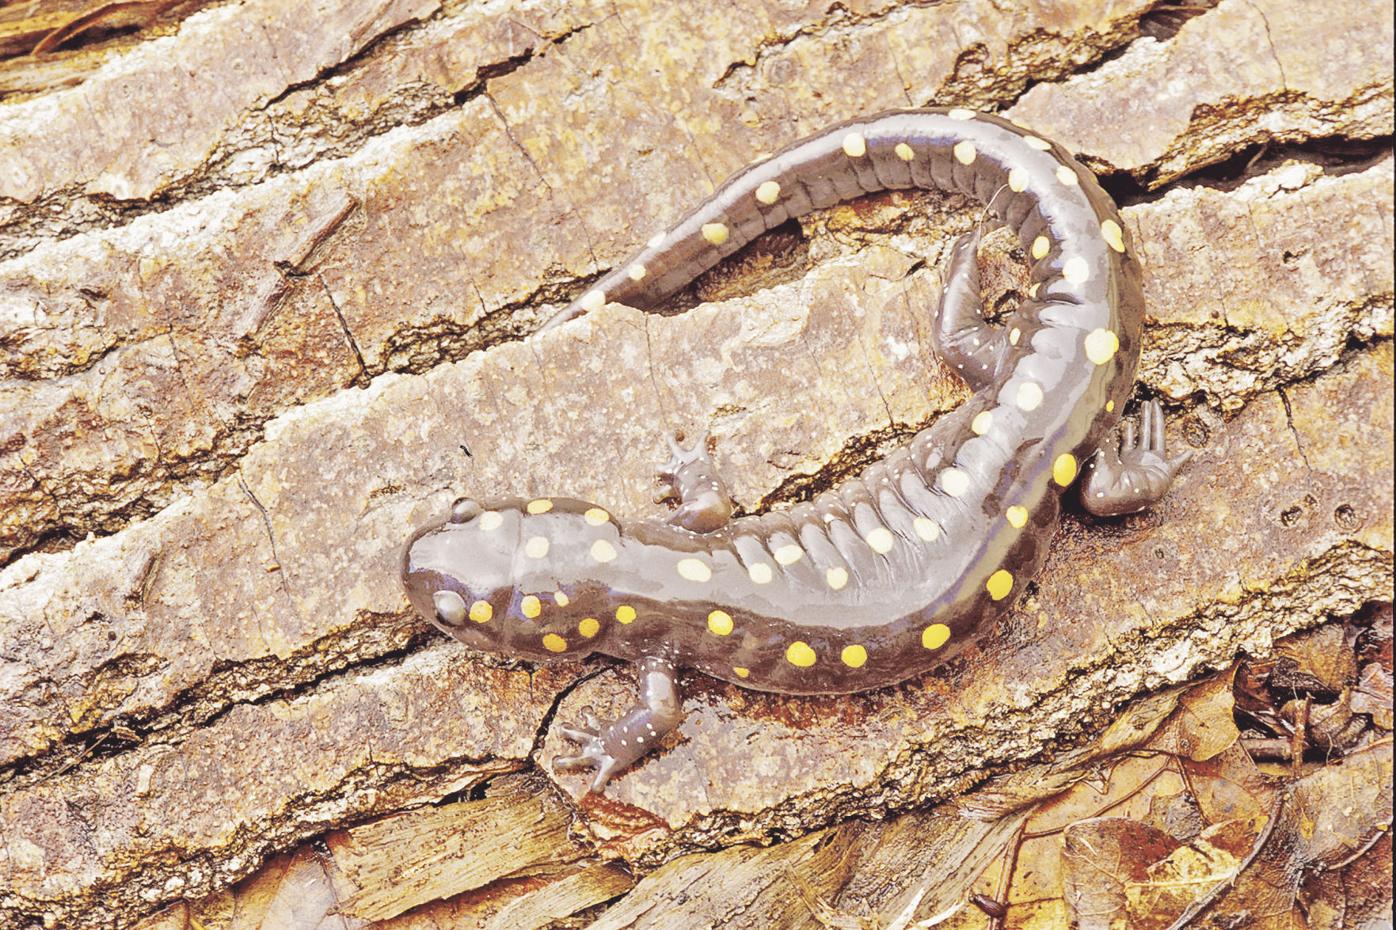 Reports of sighting salamanders encouraged, Sports